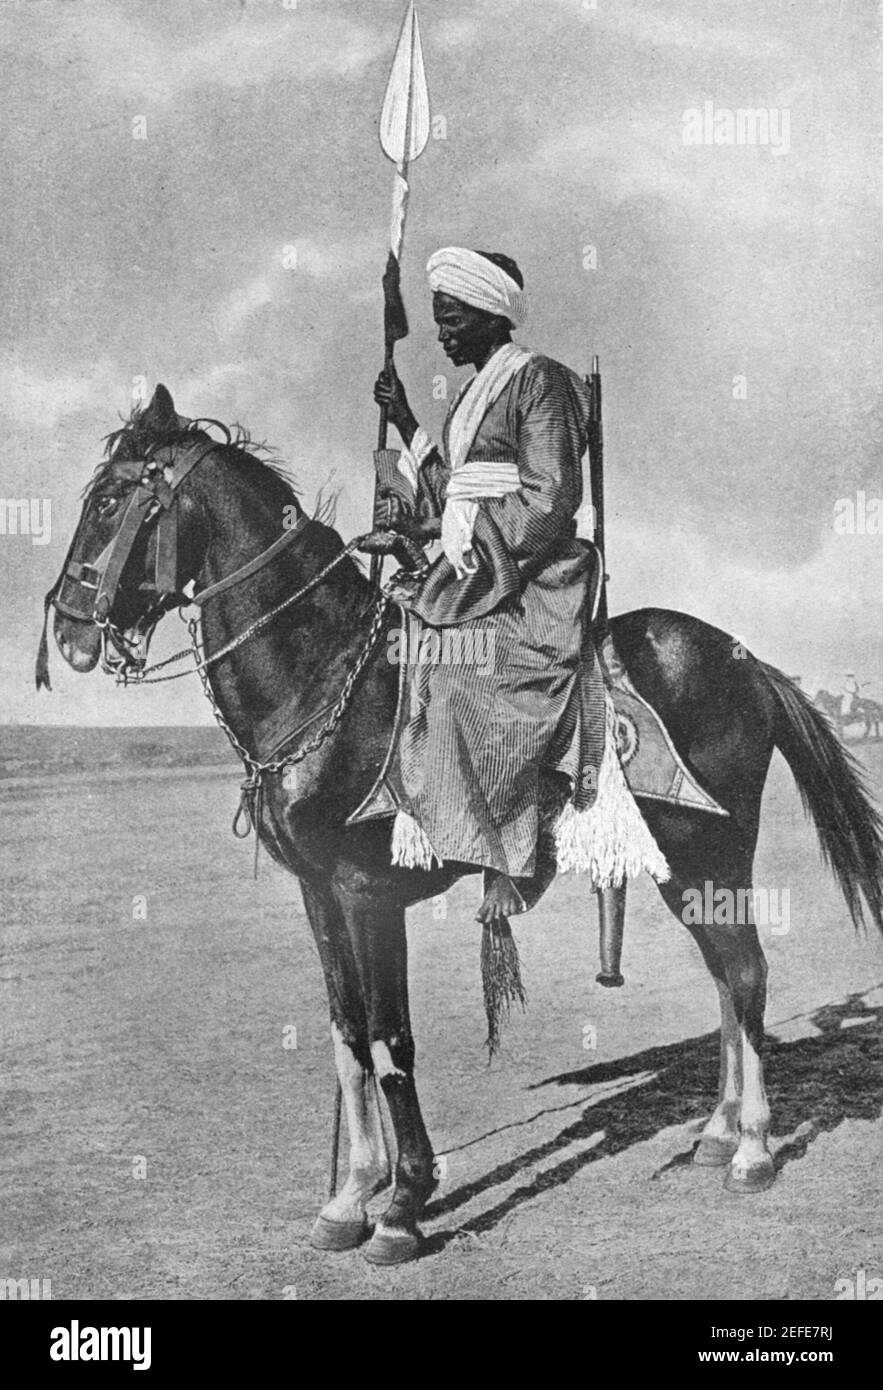 Early 20th century photo of a sheikh of a Sudanese tribe on horse back armed with a spear circa early 1900s Stock Photo